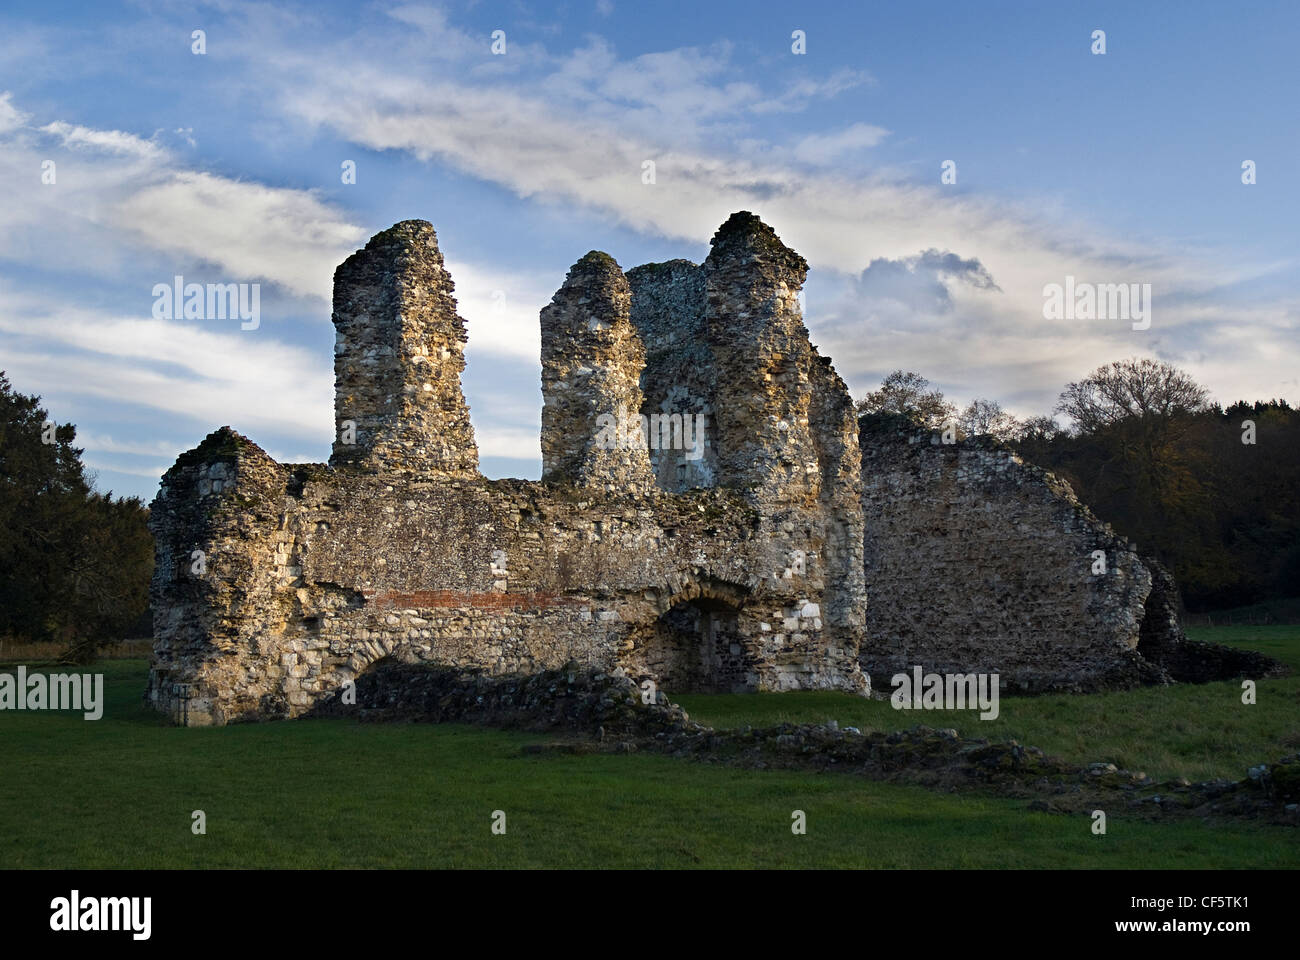 The ruins of Waverley Abbey, the first Cistercian abbey in England, founded in 1128 by William Giffard, Bishop of Winchester. Stock Photo